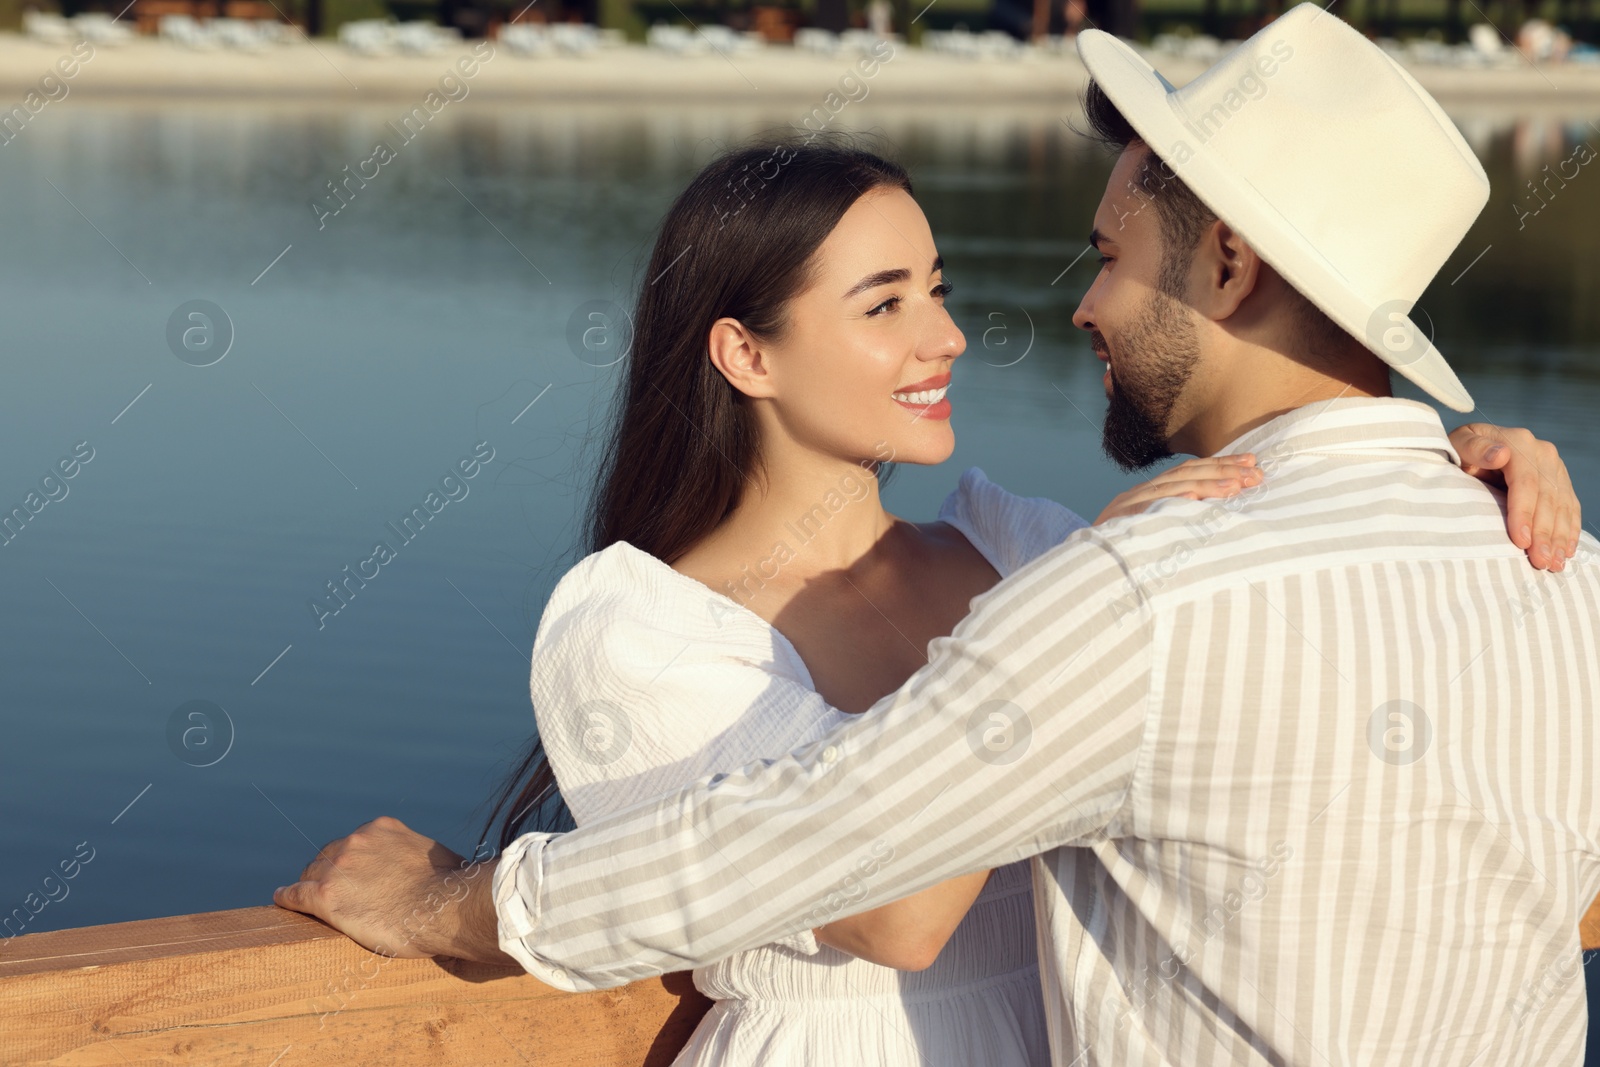 Photo of Romantic date. Beautiful couple spending time together near lake